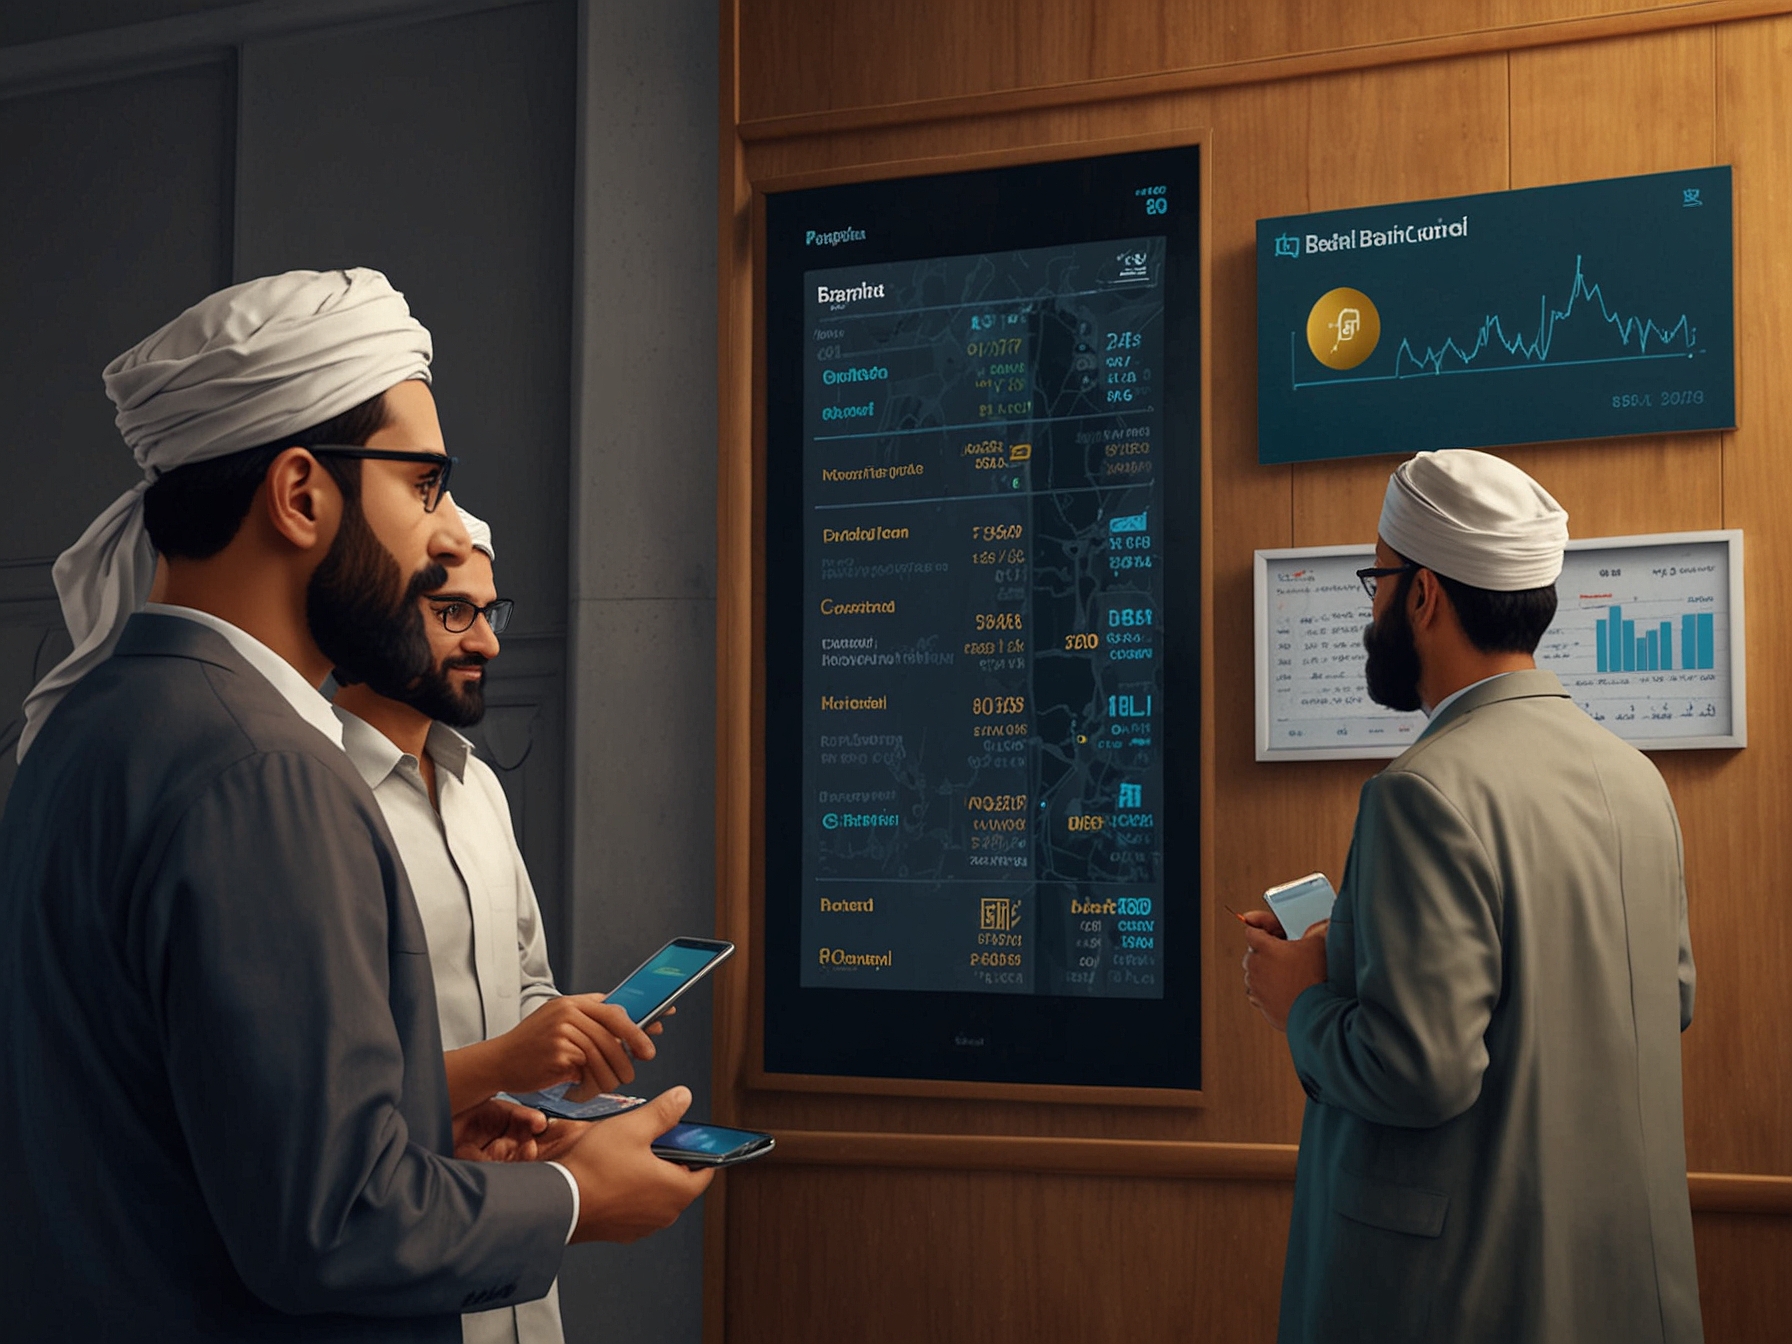 A digital banking screen, symbolizing uninterrupted banking services on Bakri Eid, with people accessing online financial platforms despite the closure of stock and commodities markets.